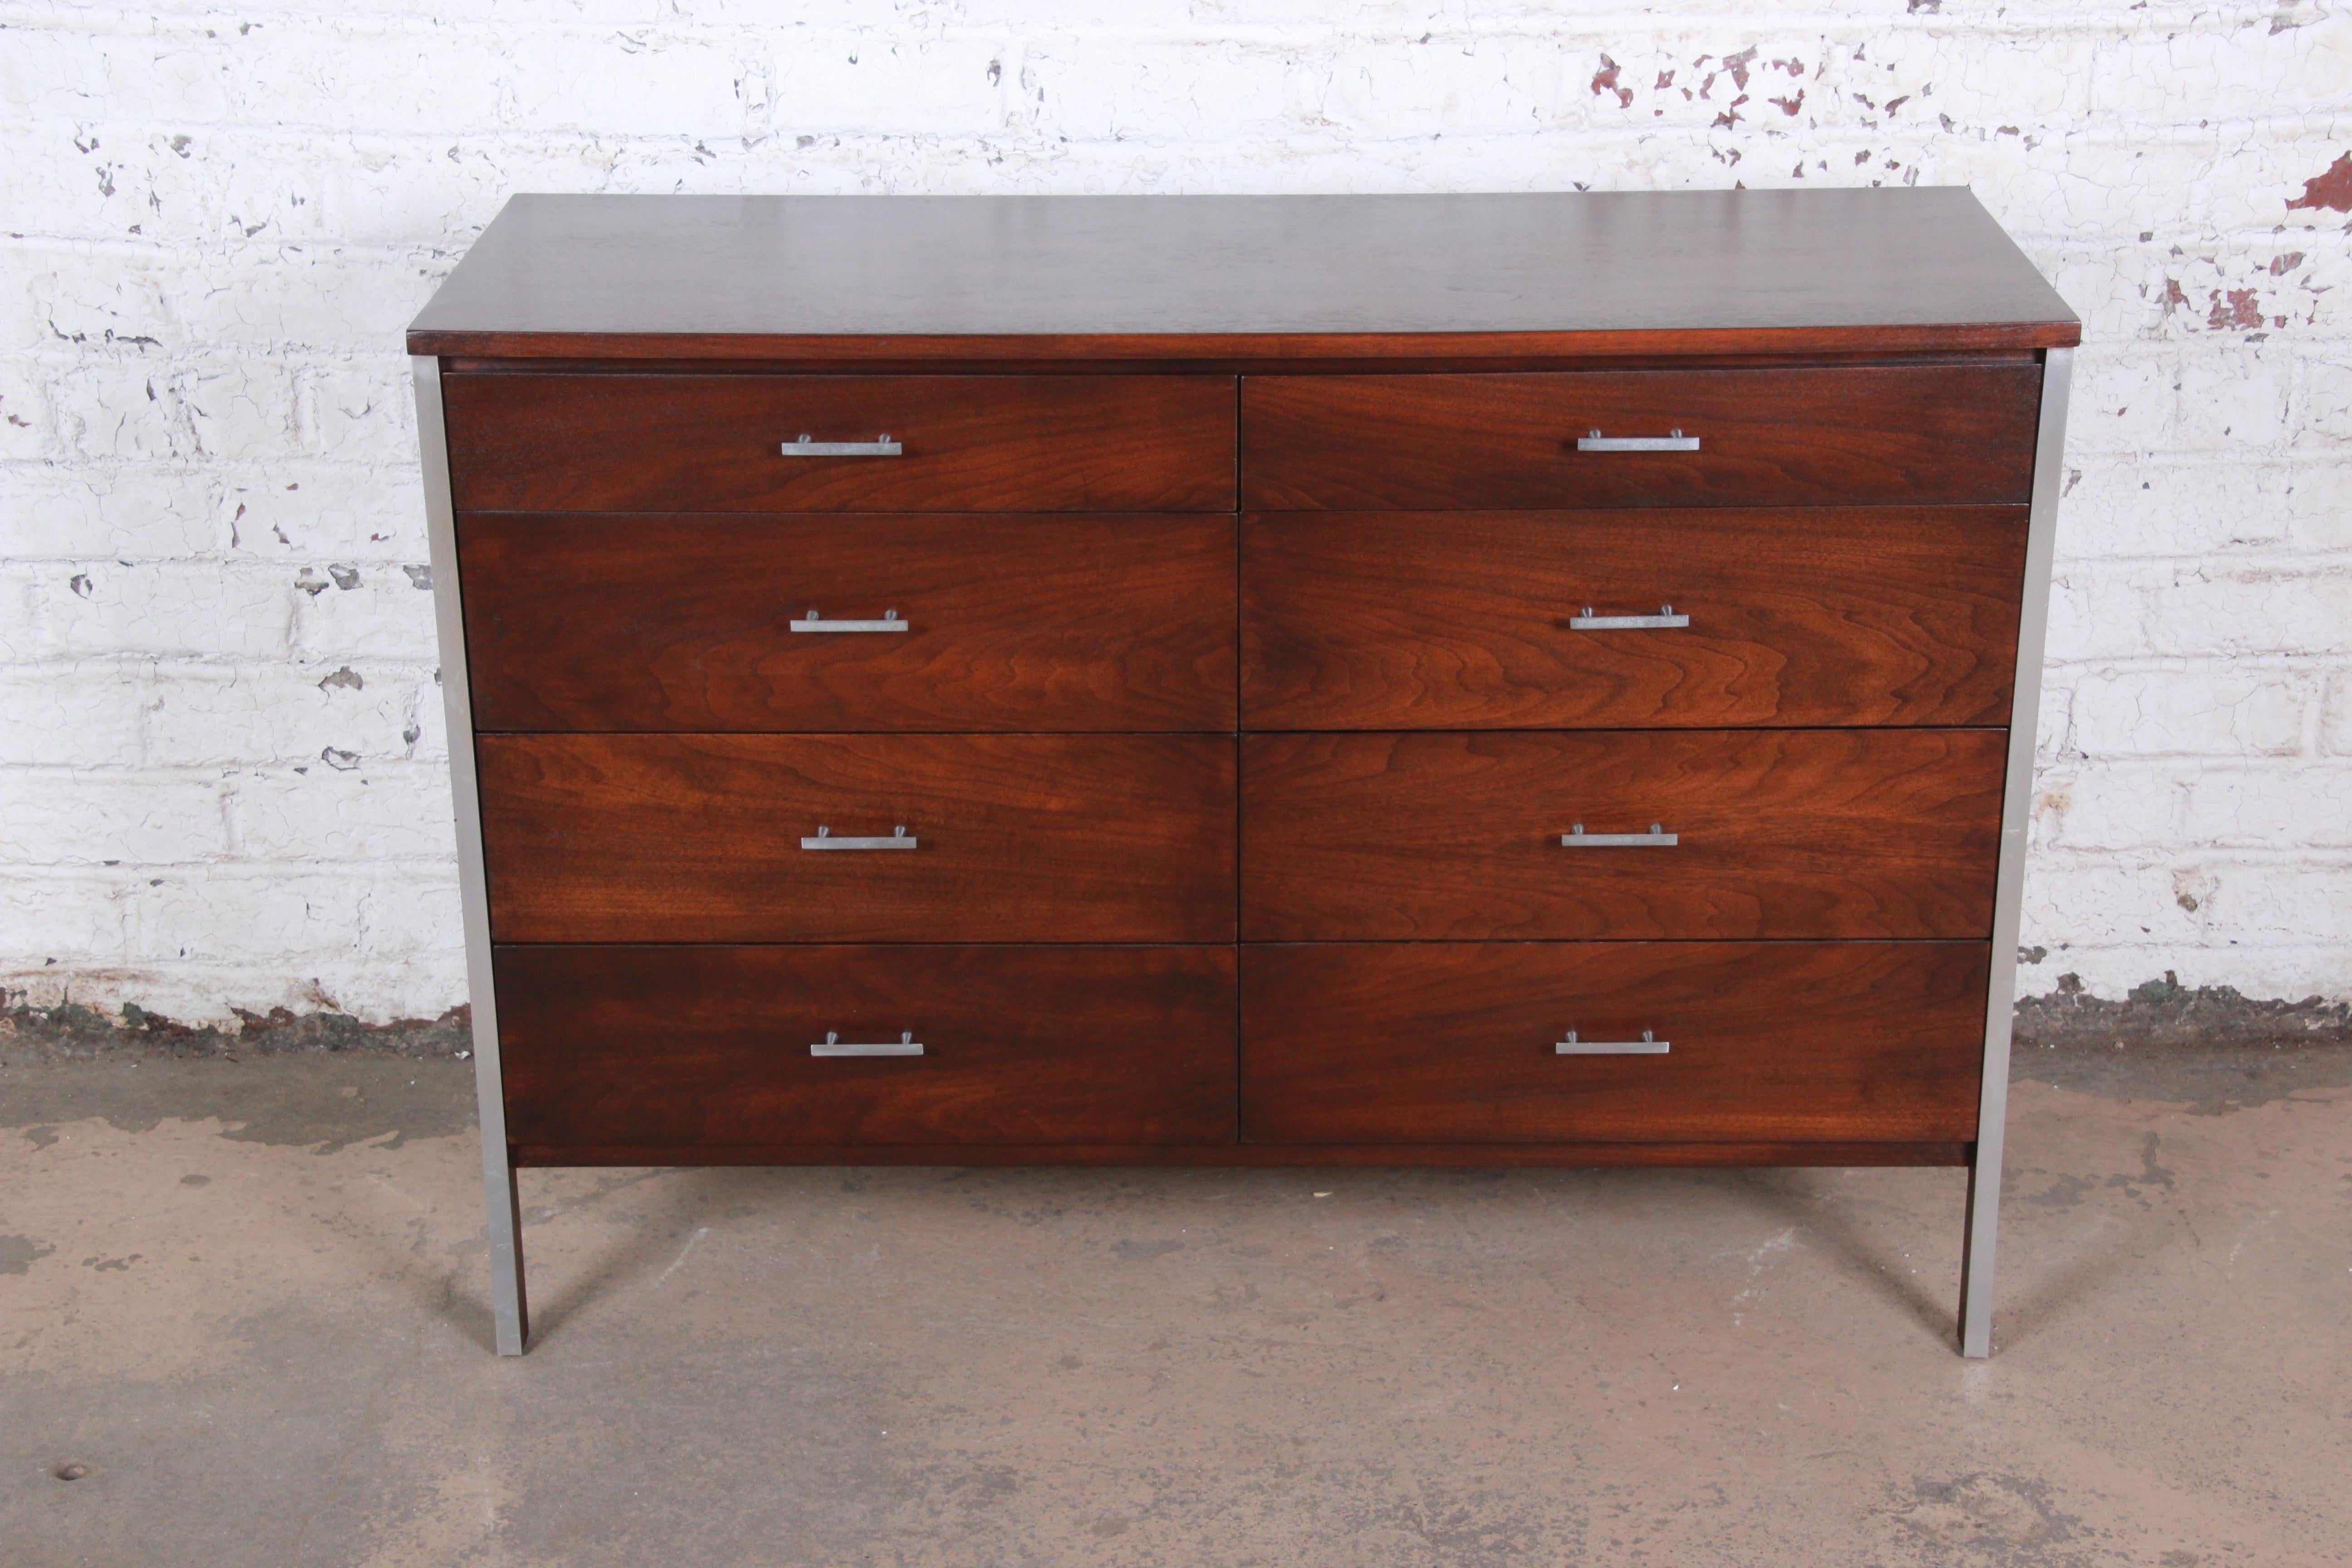 An exceptional Mid-Century Modern dresser or credenza designed by Paul McCobb for his Linear Group line for Calvin Furniture. The dresser features beautiful walnut wood grain with aluminum trim. It offers ample storage, with eight dovetailed drawers